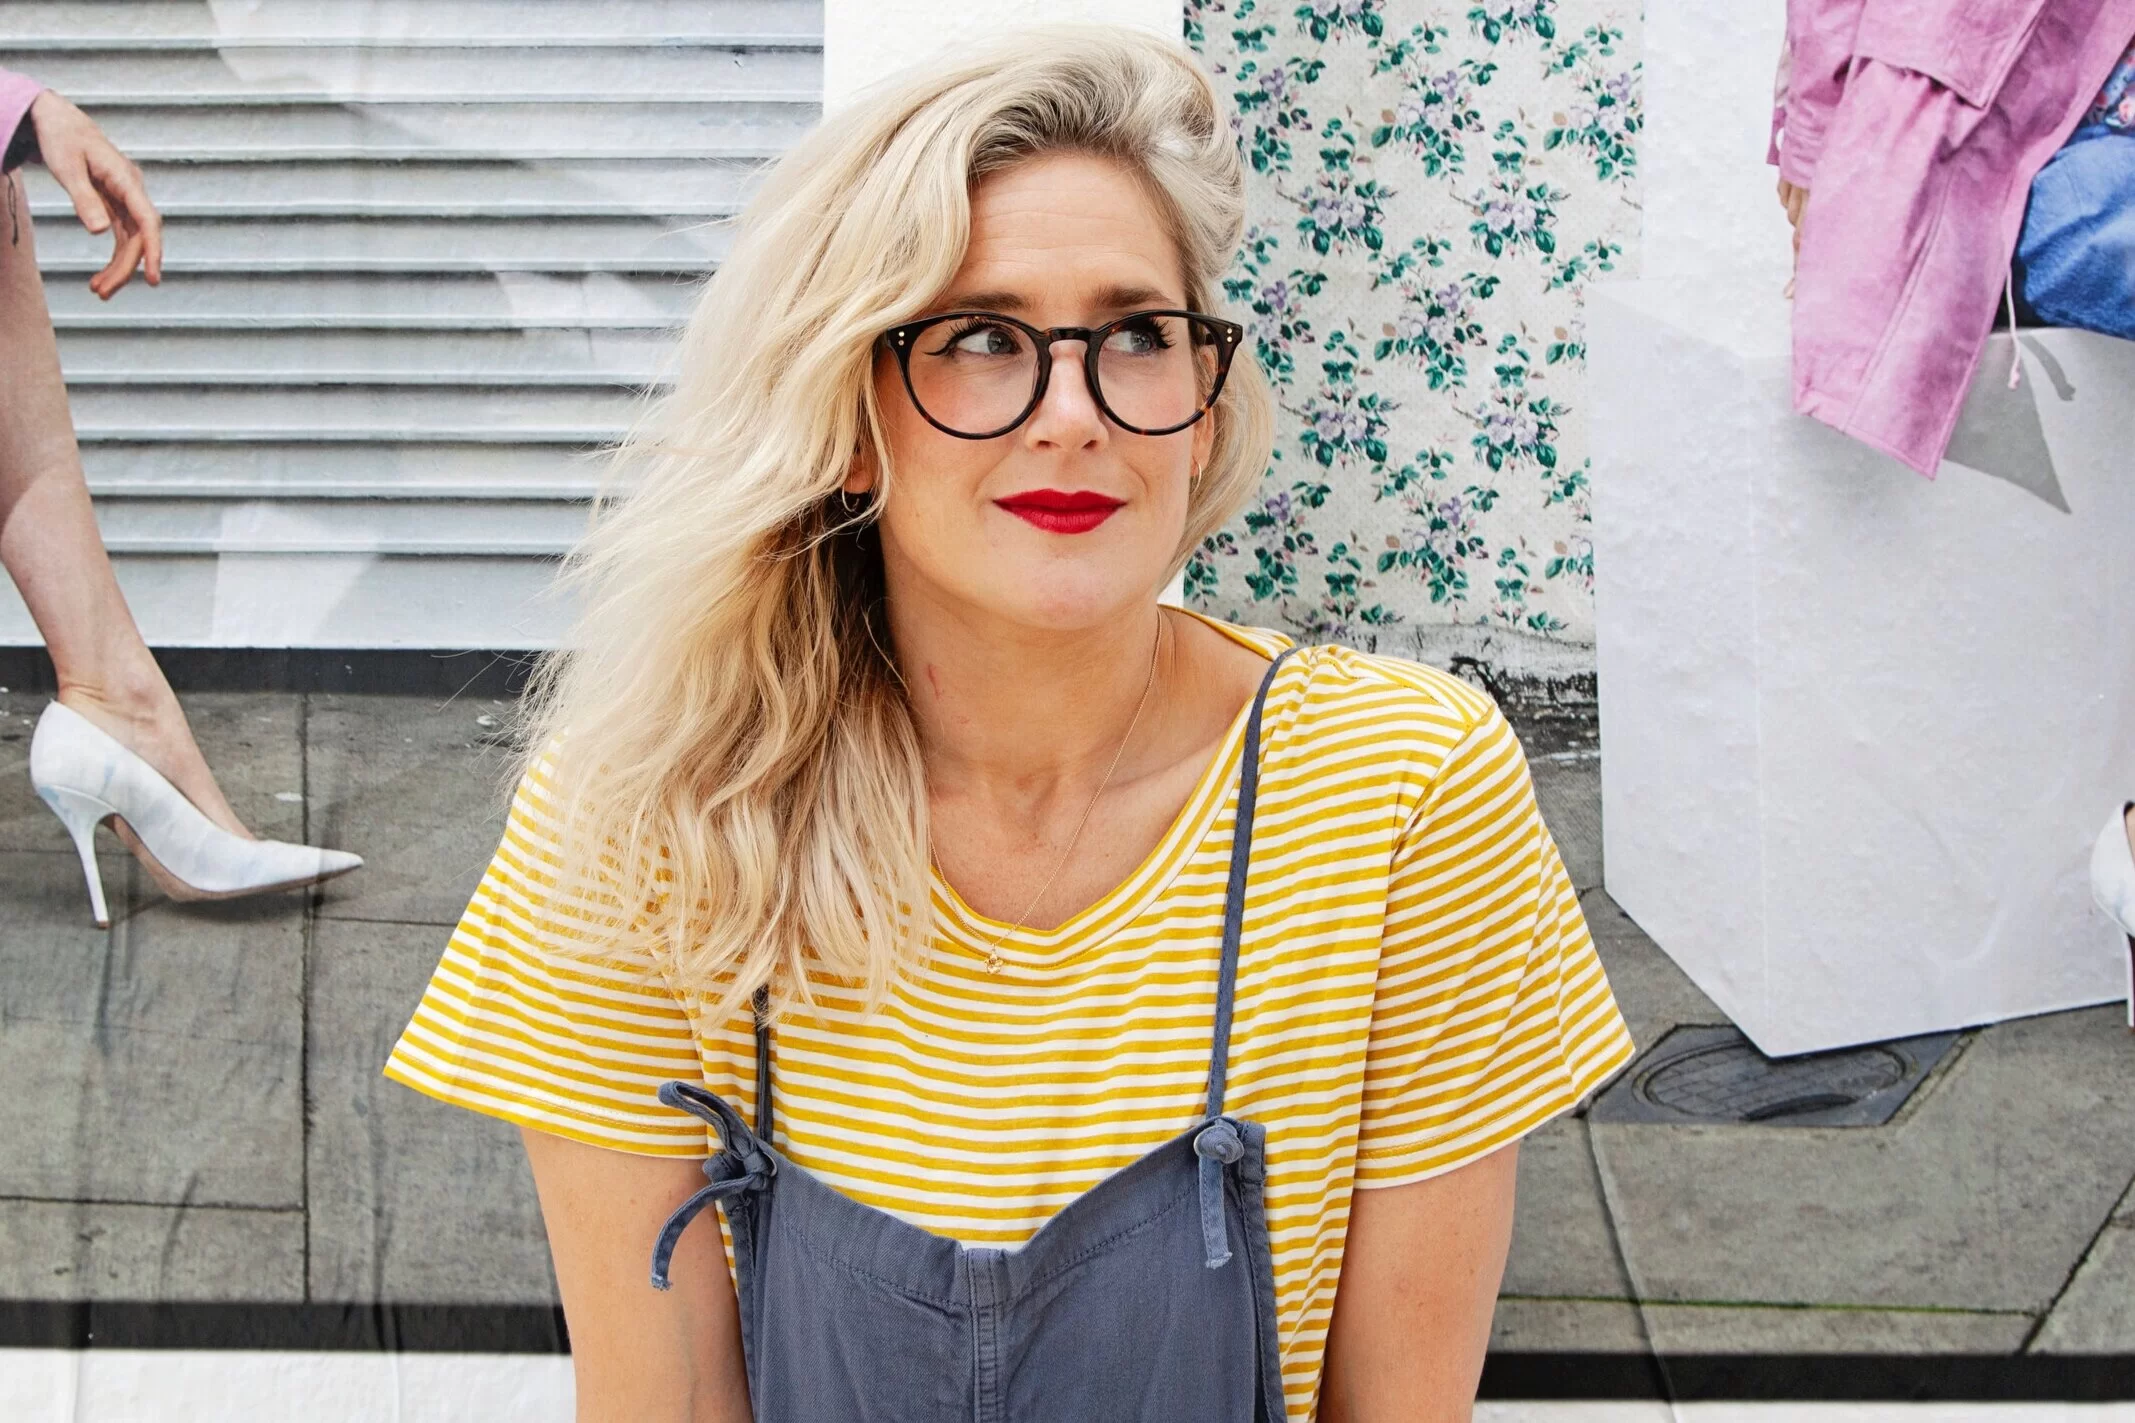 Anna Whitehouse, founder of Mother Pukka, smiling to the side wearing black framed glasses and a white and yellow striped top.